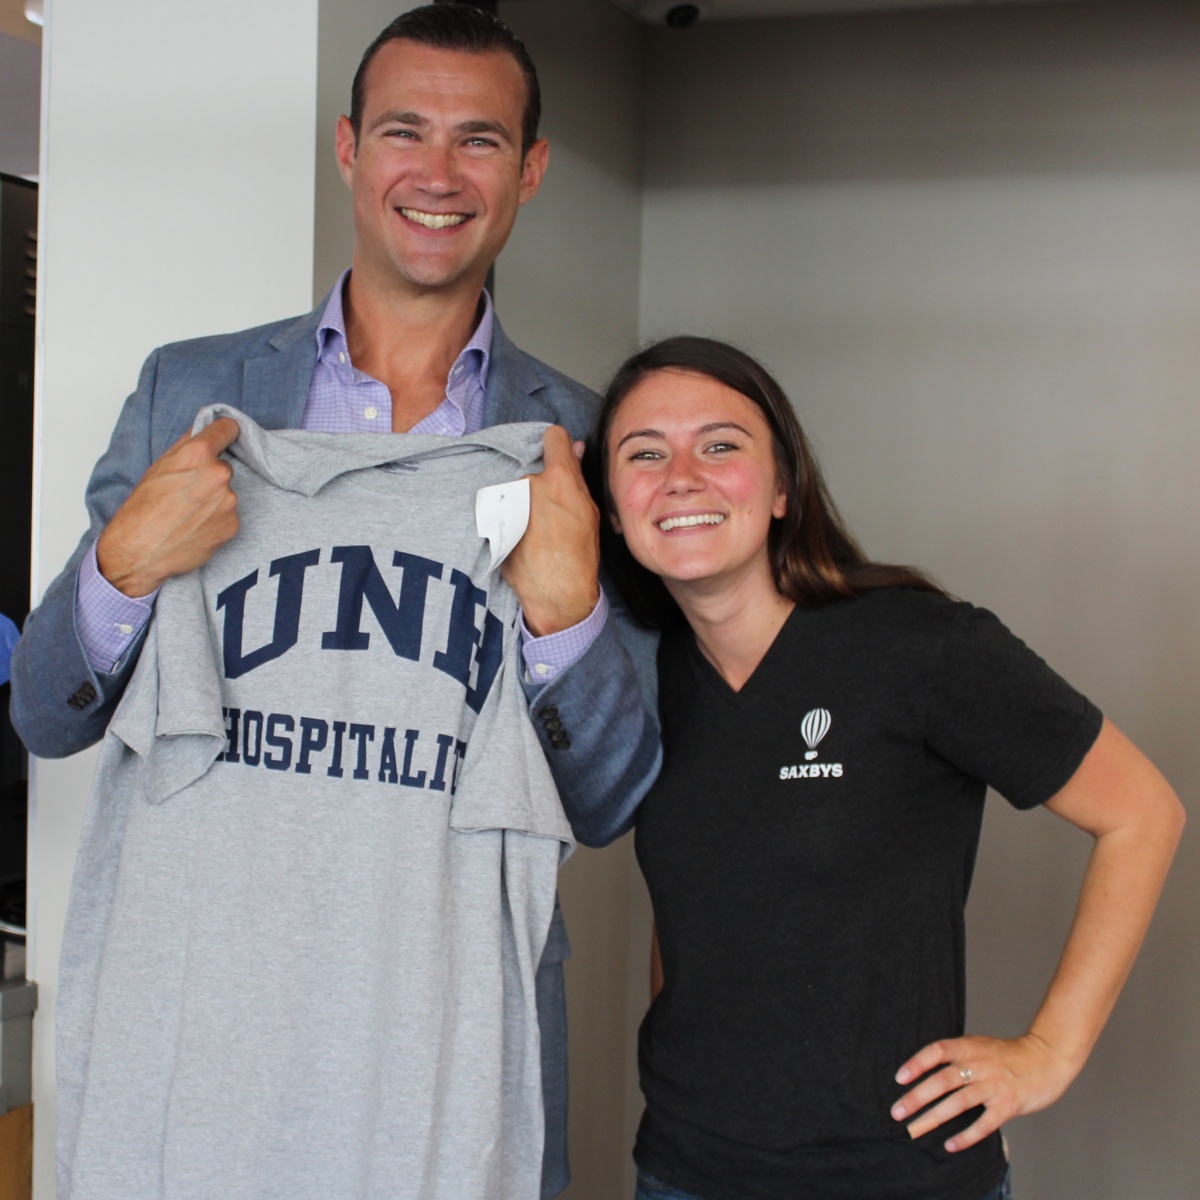 Crowe with Saxbys CEO Nick Bayer after gifting him with a UNH Hospitality T-shirt